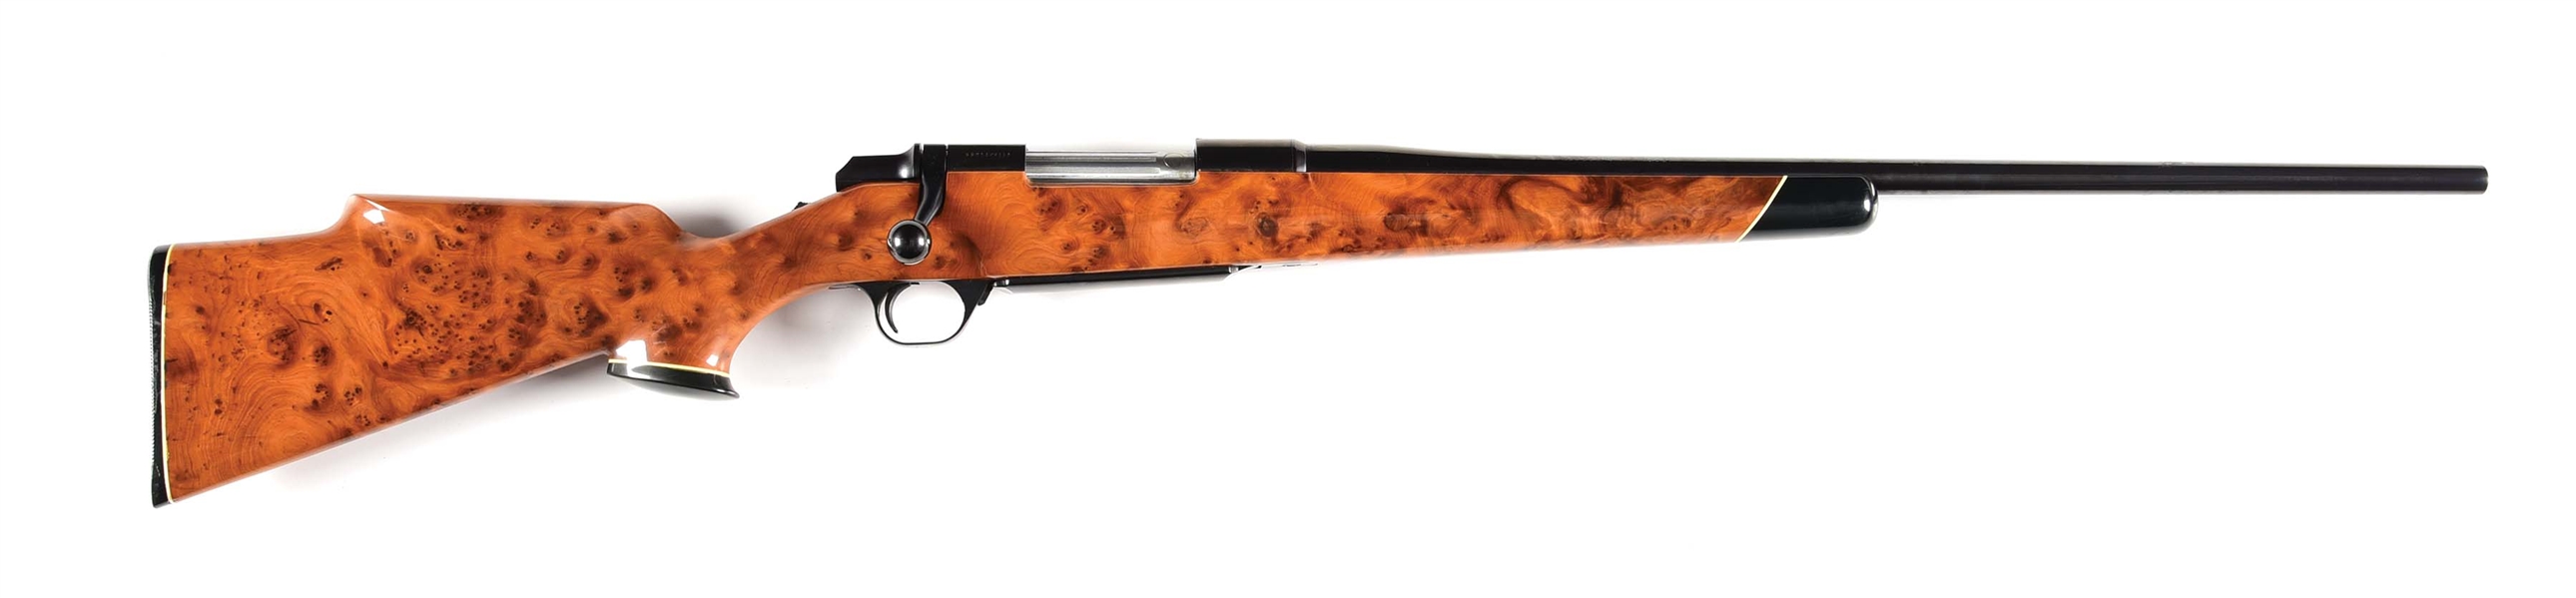 (M) THUYA BURL STOCKED BROWNING BBR BOLT ACTION RIFLE.